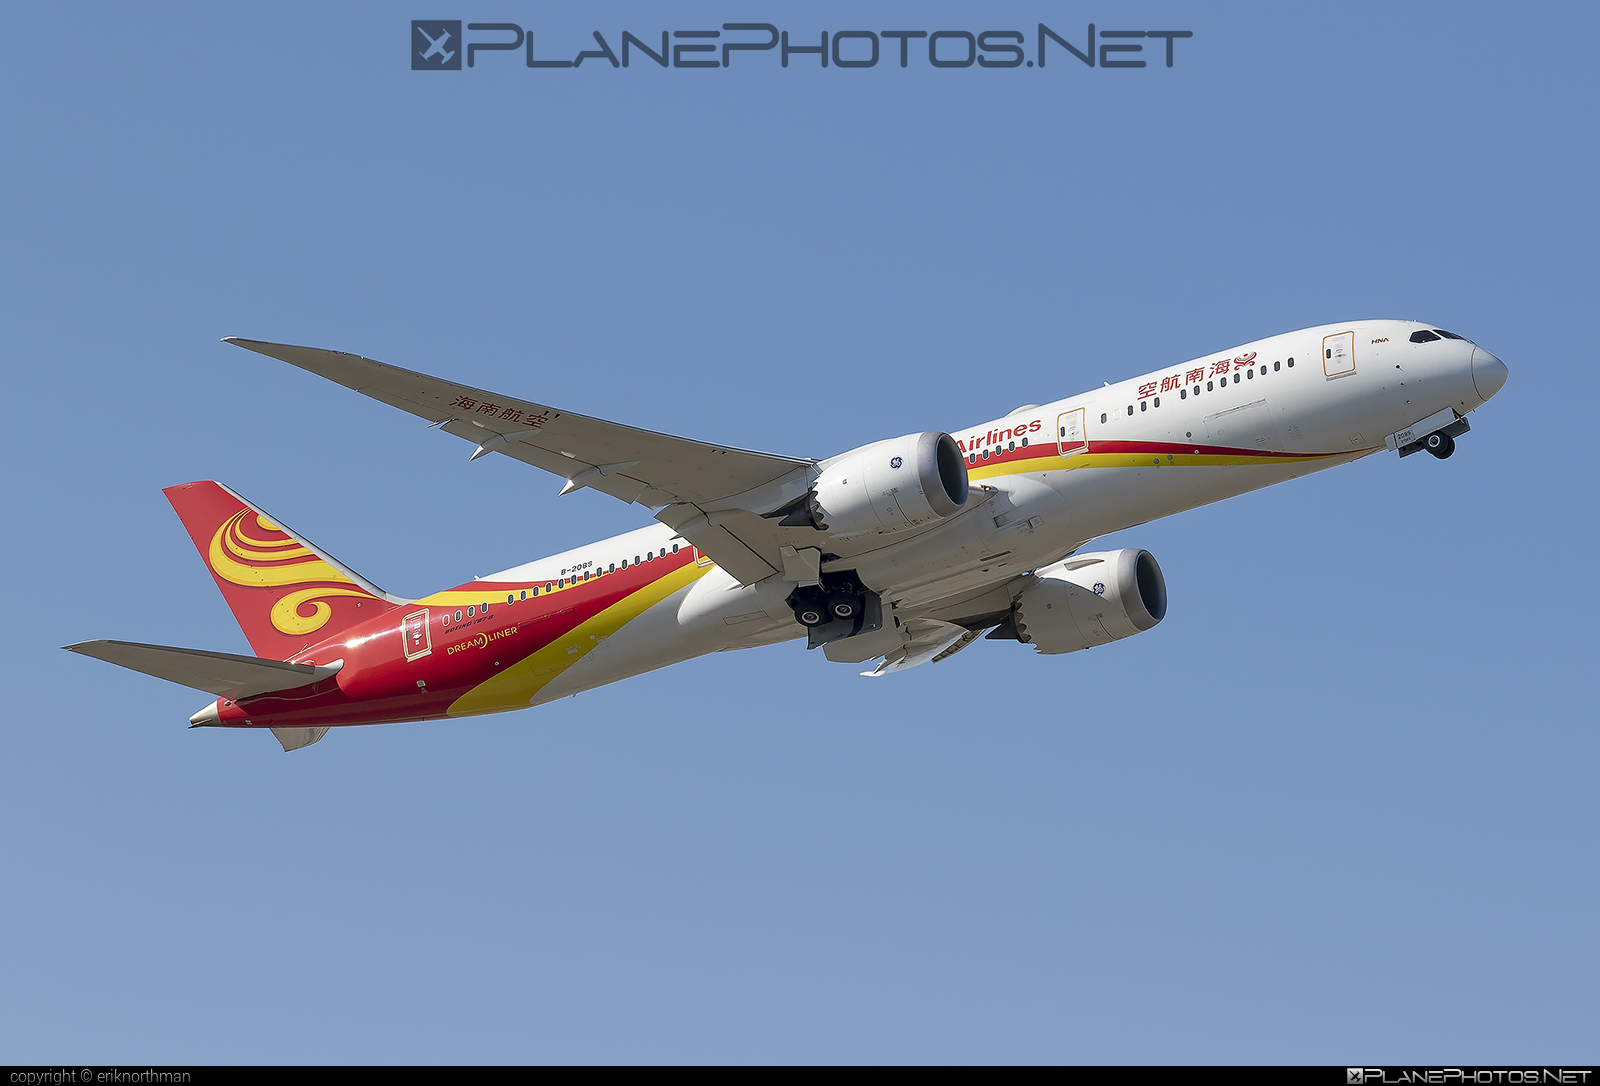 Boeing 787-9 Dreamliner - B-208S operated by Hainan Airlines #b787 #boeing #boeing787 #dreamliner